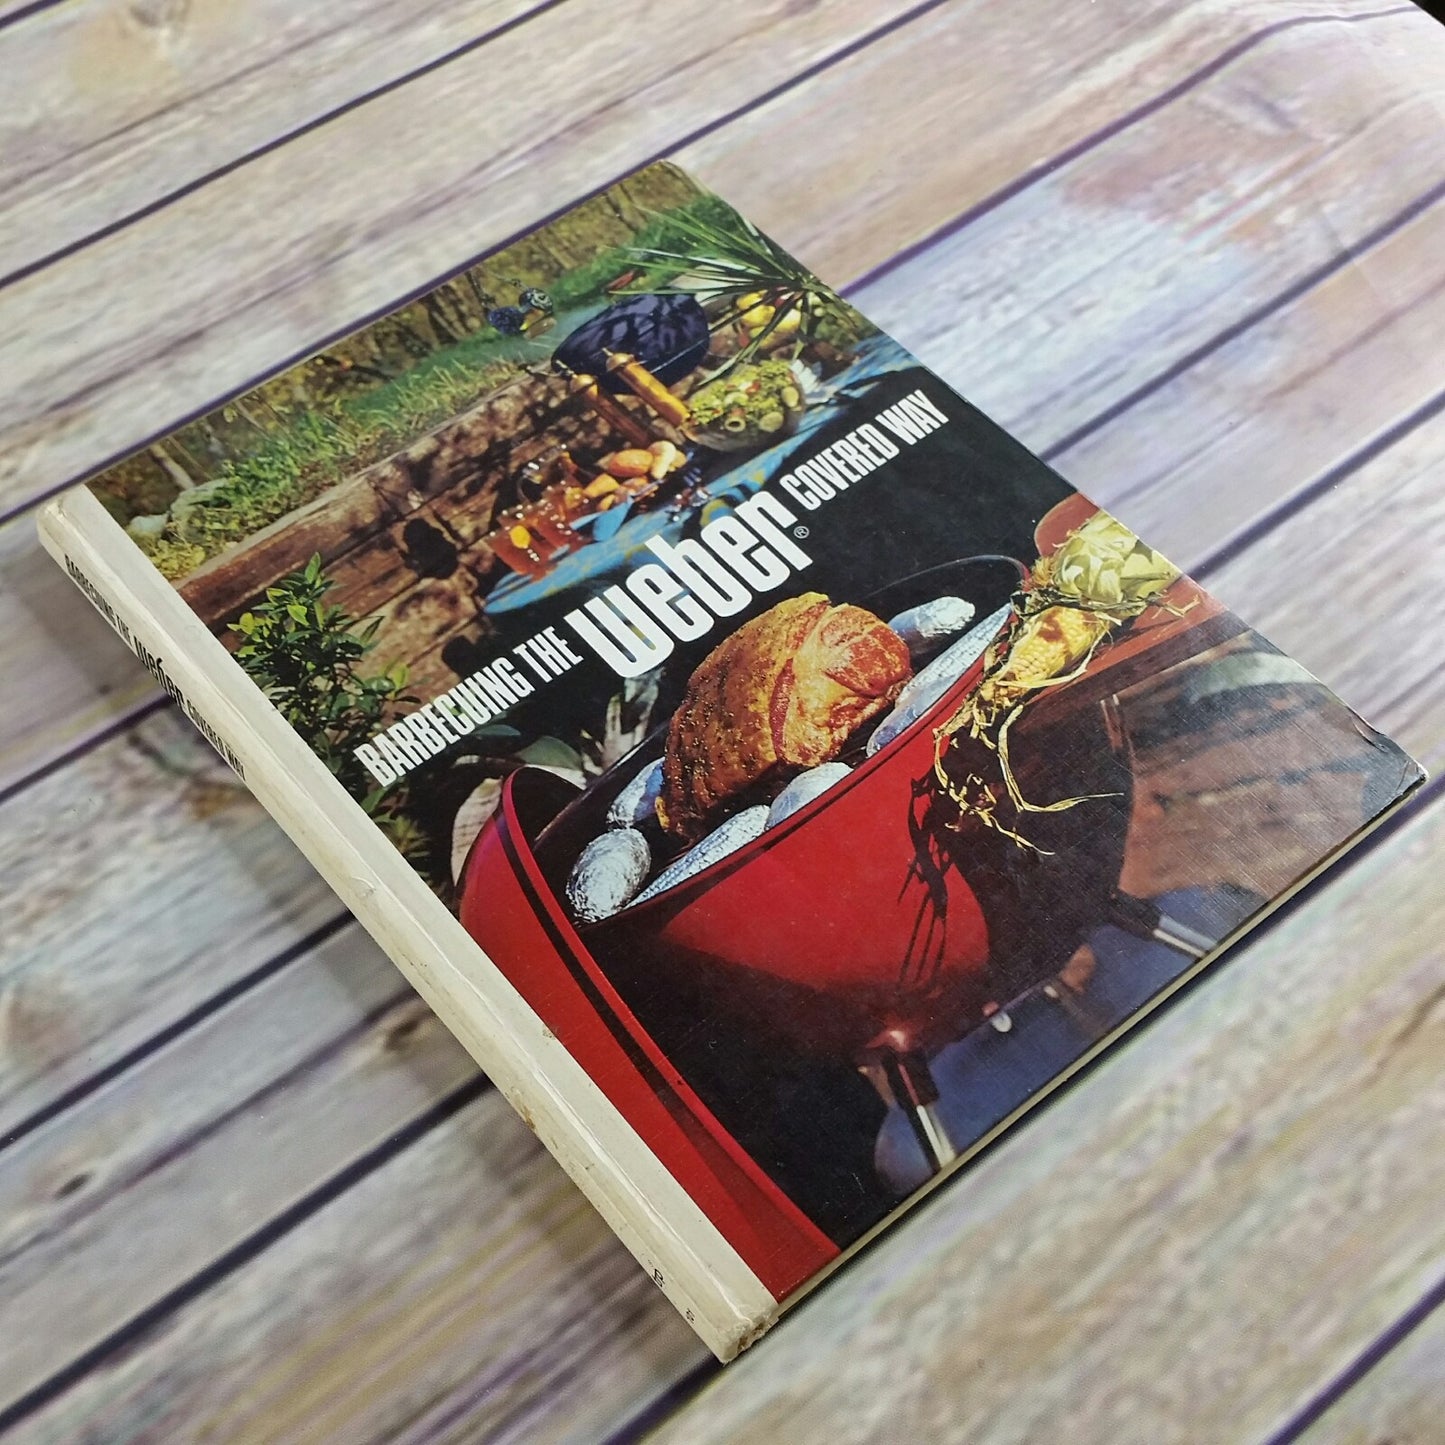 Vintage Cookbook Barbecuing the Weber Covered Way Charcoal Grill 1st Ed 1972 - At Grandma's Table